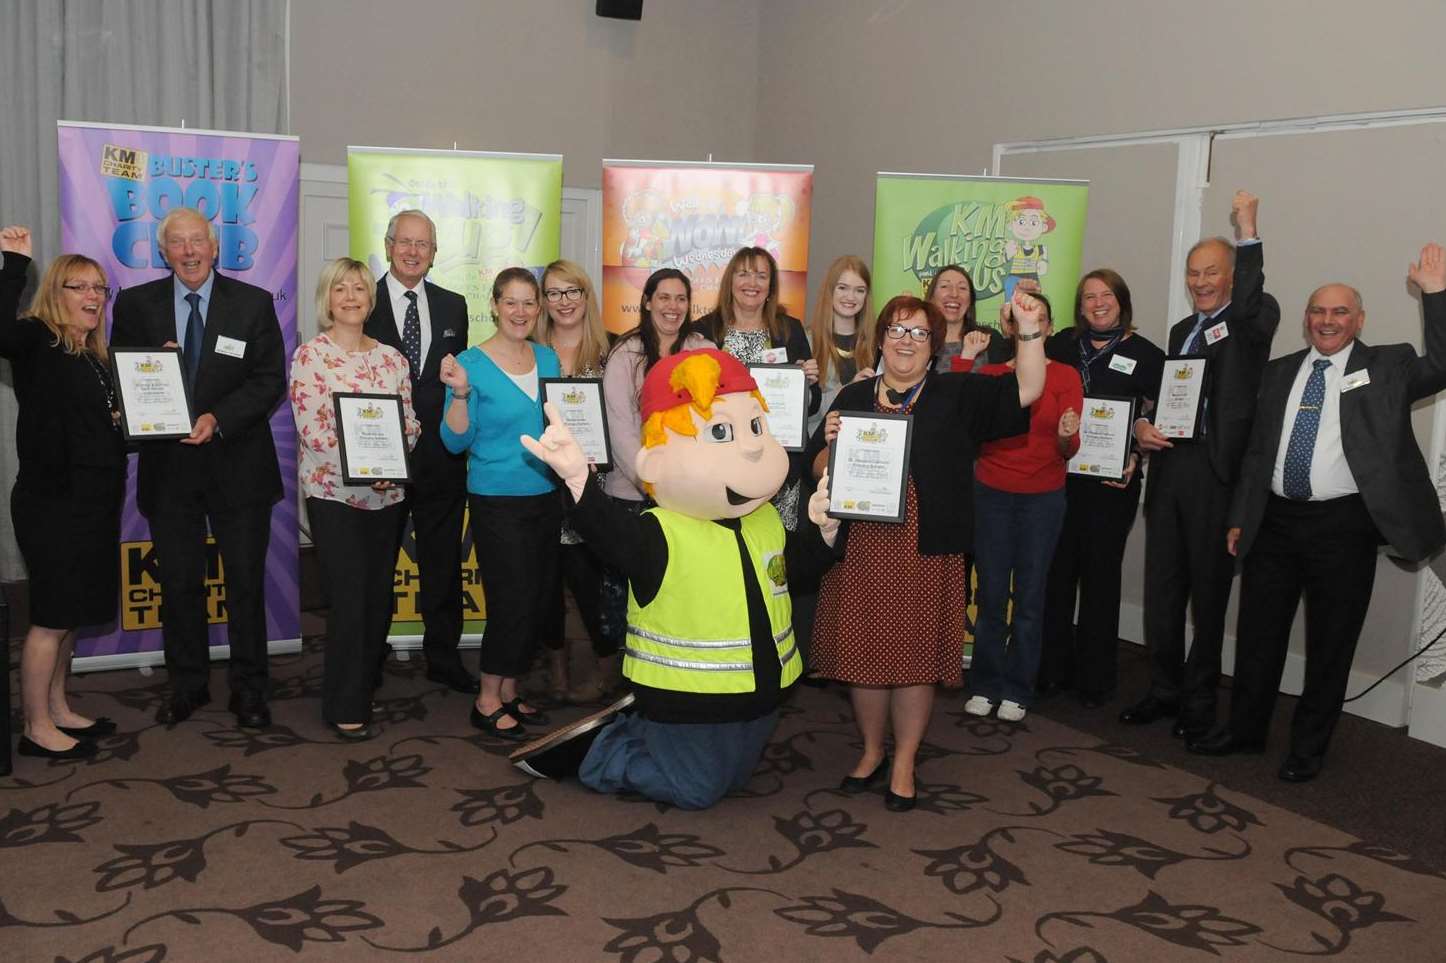 Schools celebrate their walking bus birthdays with Walk to School mascot Sam and sponsors Mini Babybel, Orbit South, Leeds Castle, Specsavers, Kent County Council and Medway Council at the KM Charity Team's annual forum at Mercure Great Danes Hotel, Maidstone